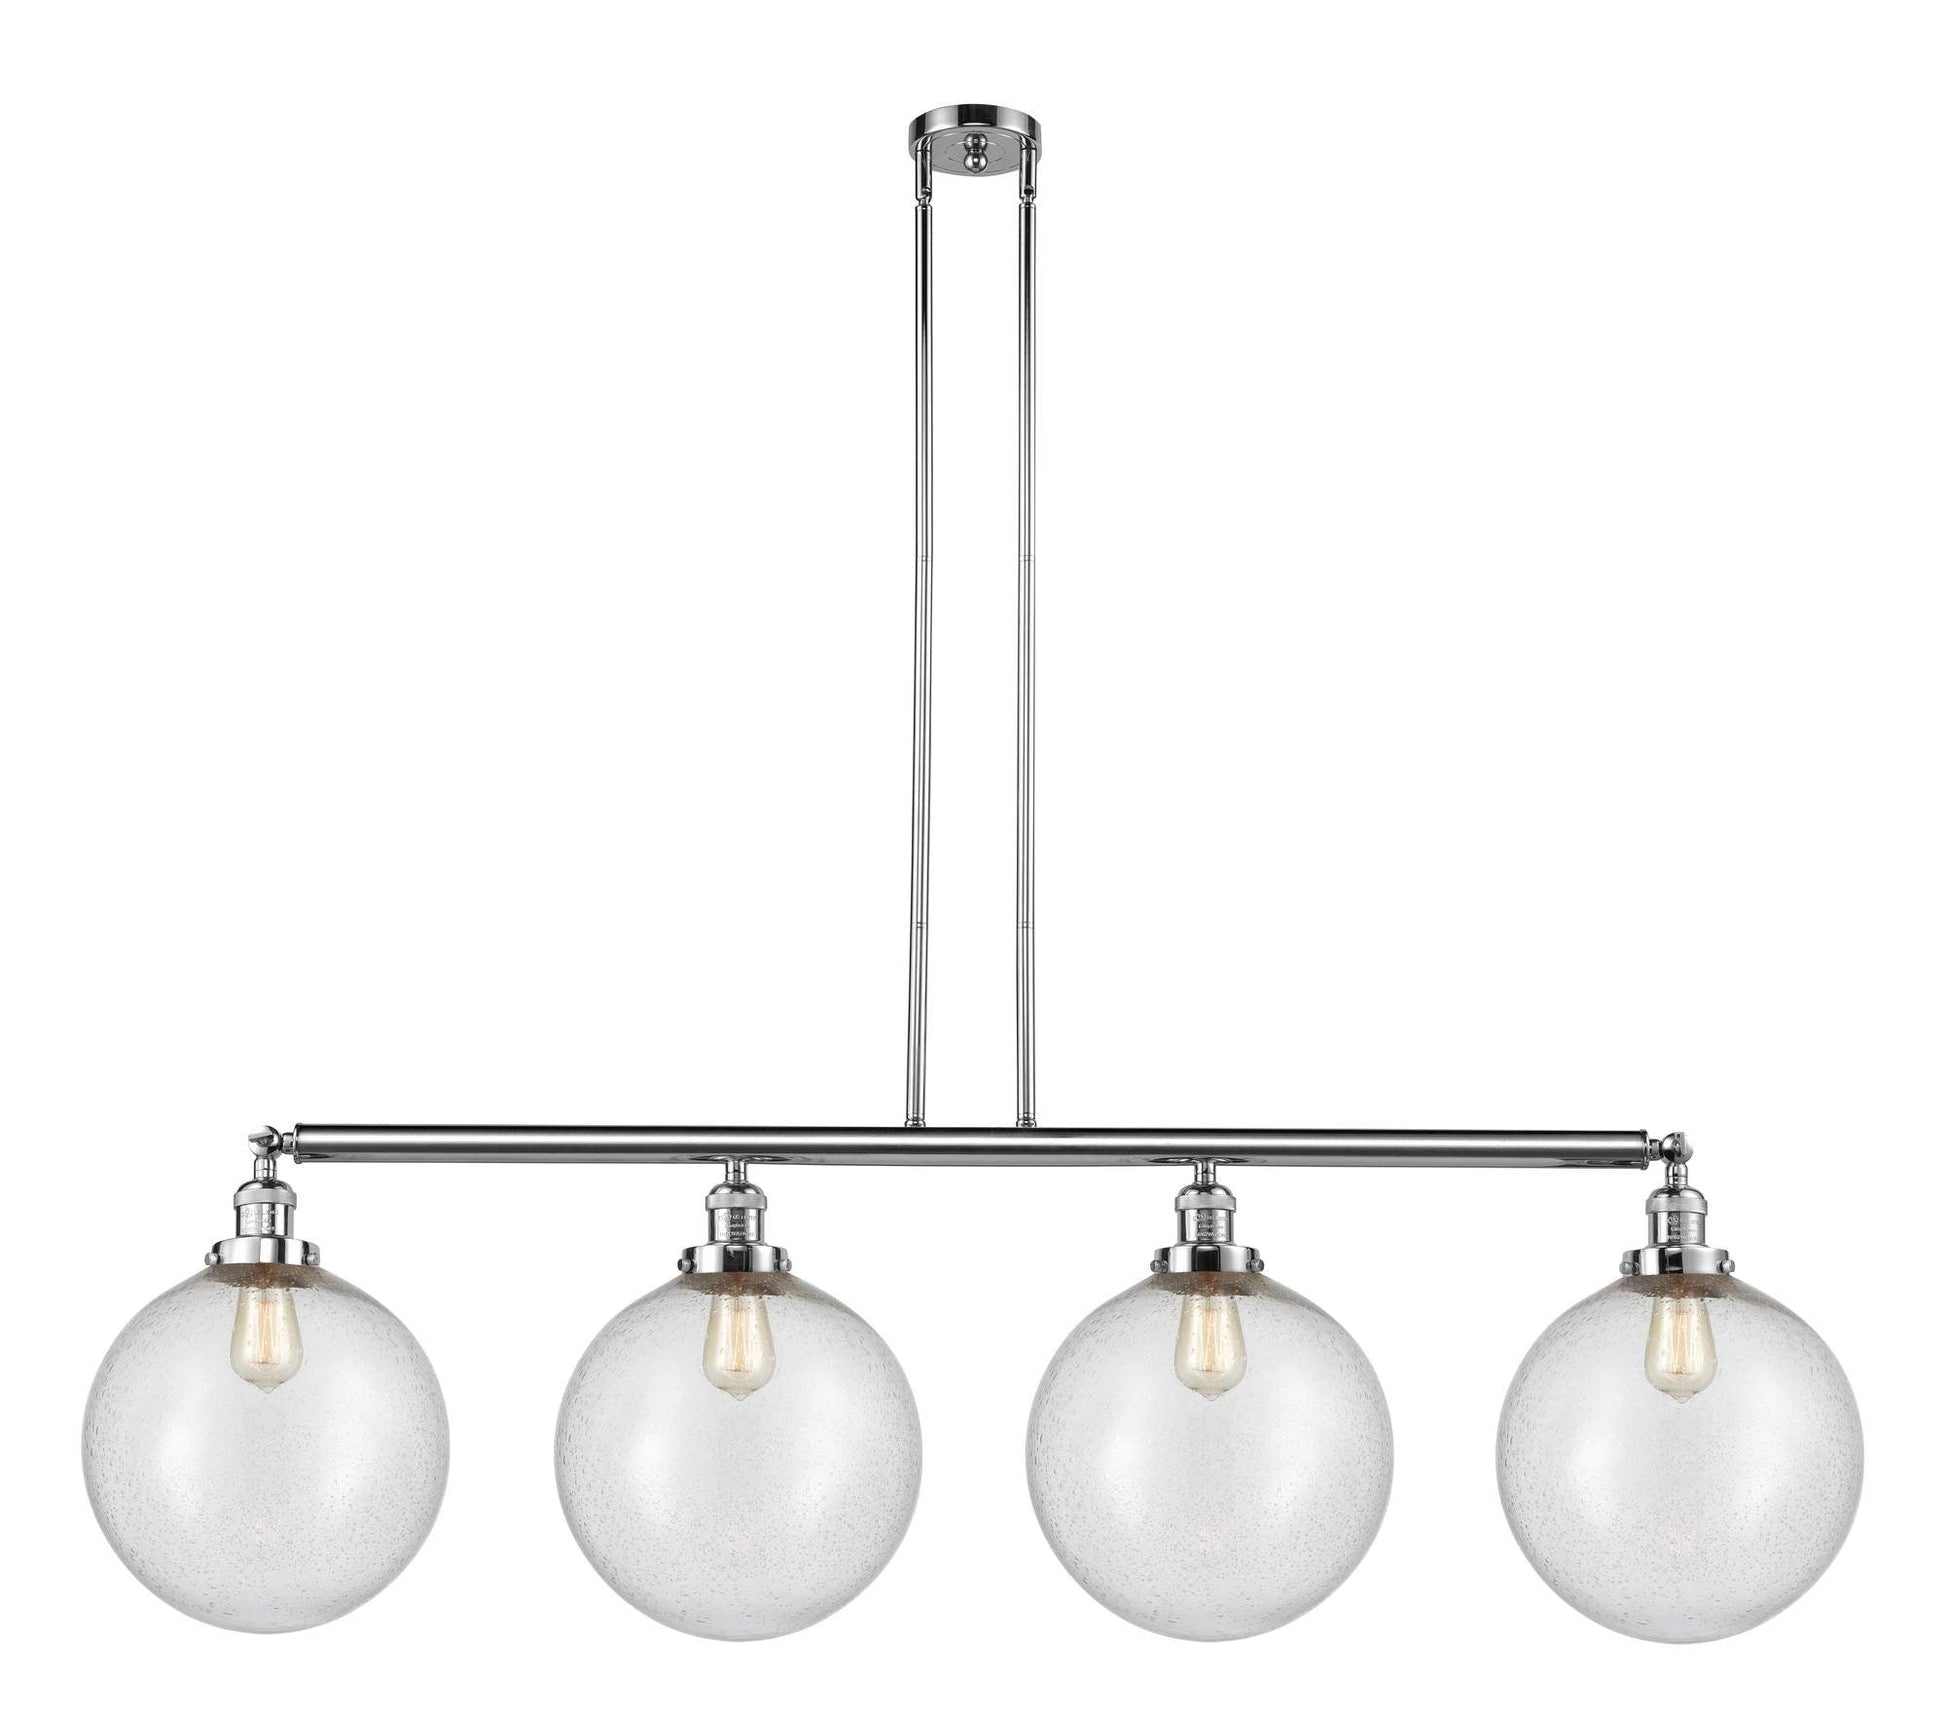 214-PC-G204-12 4-Light 56" Polished Chrome Island Light - Seedy Beacon Glass - LED Bulb - Dimmensions: 56 x 12 x 16<br>Minimum Height : 26<br>Maximum Height : 50 - Sloped Ceiling Compatible: Yes